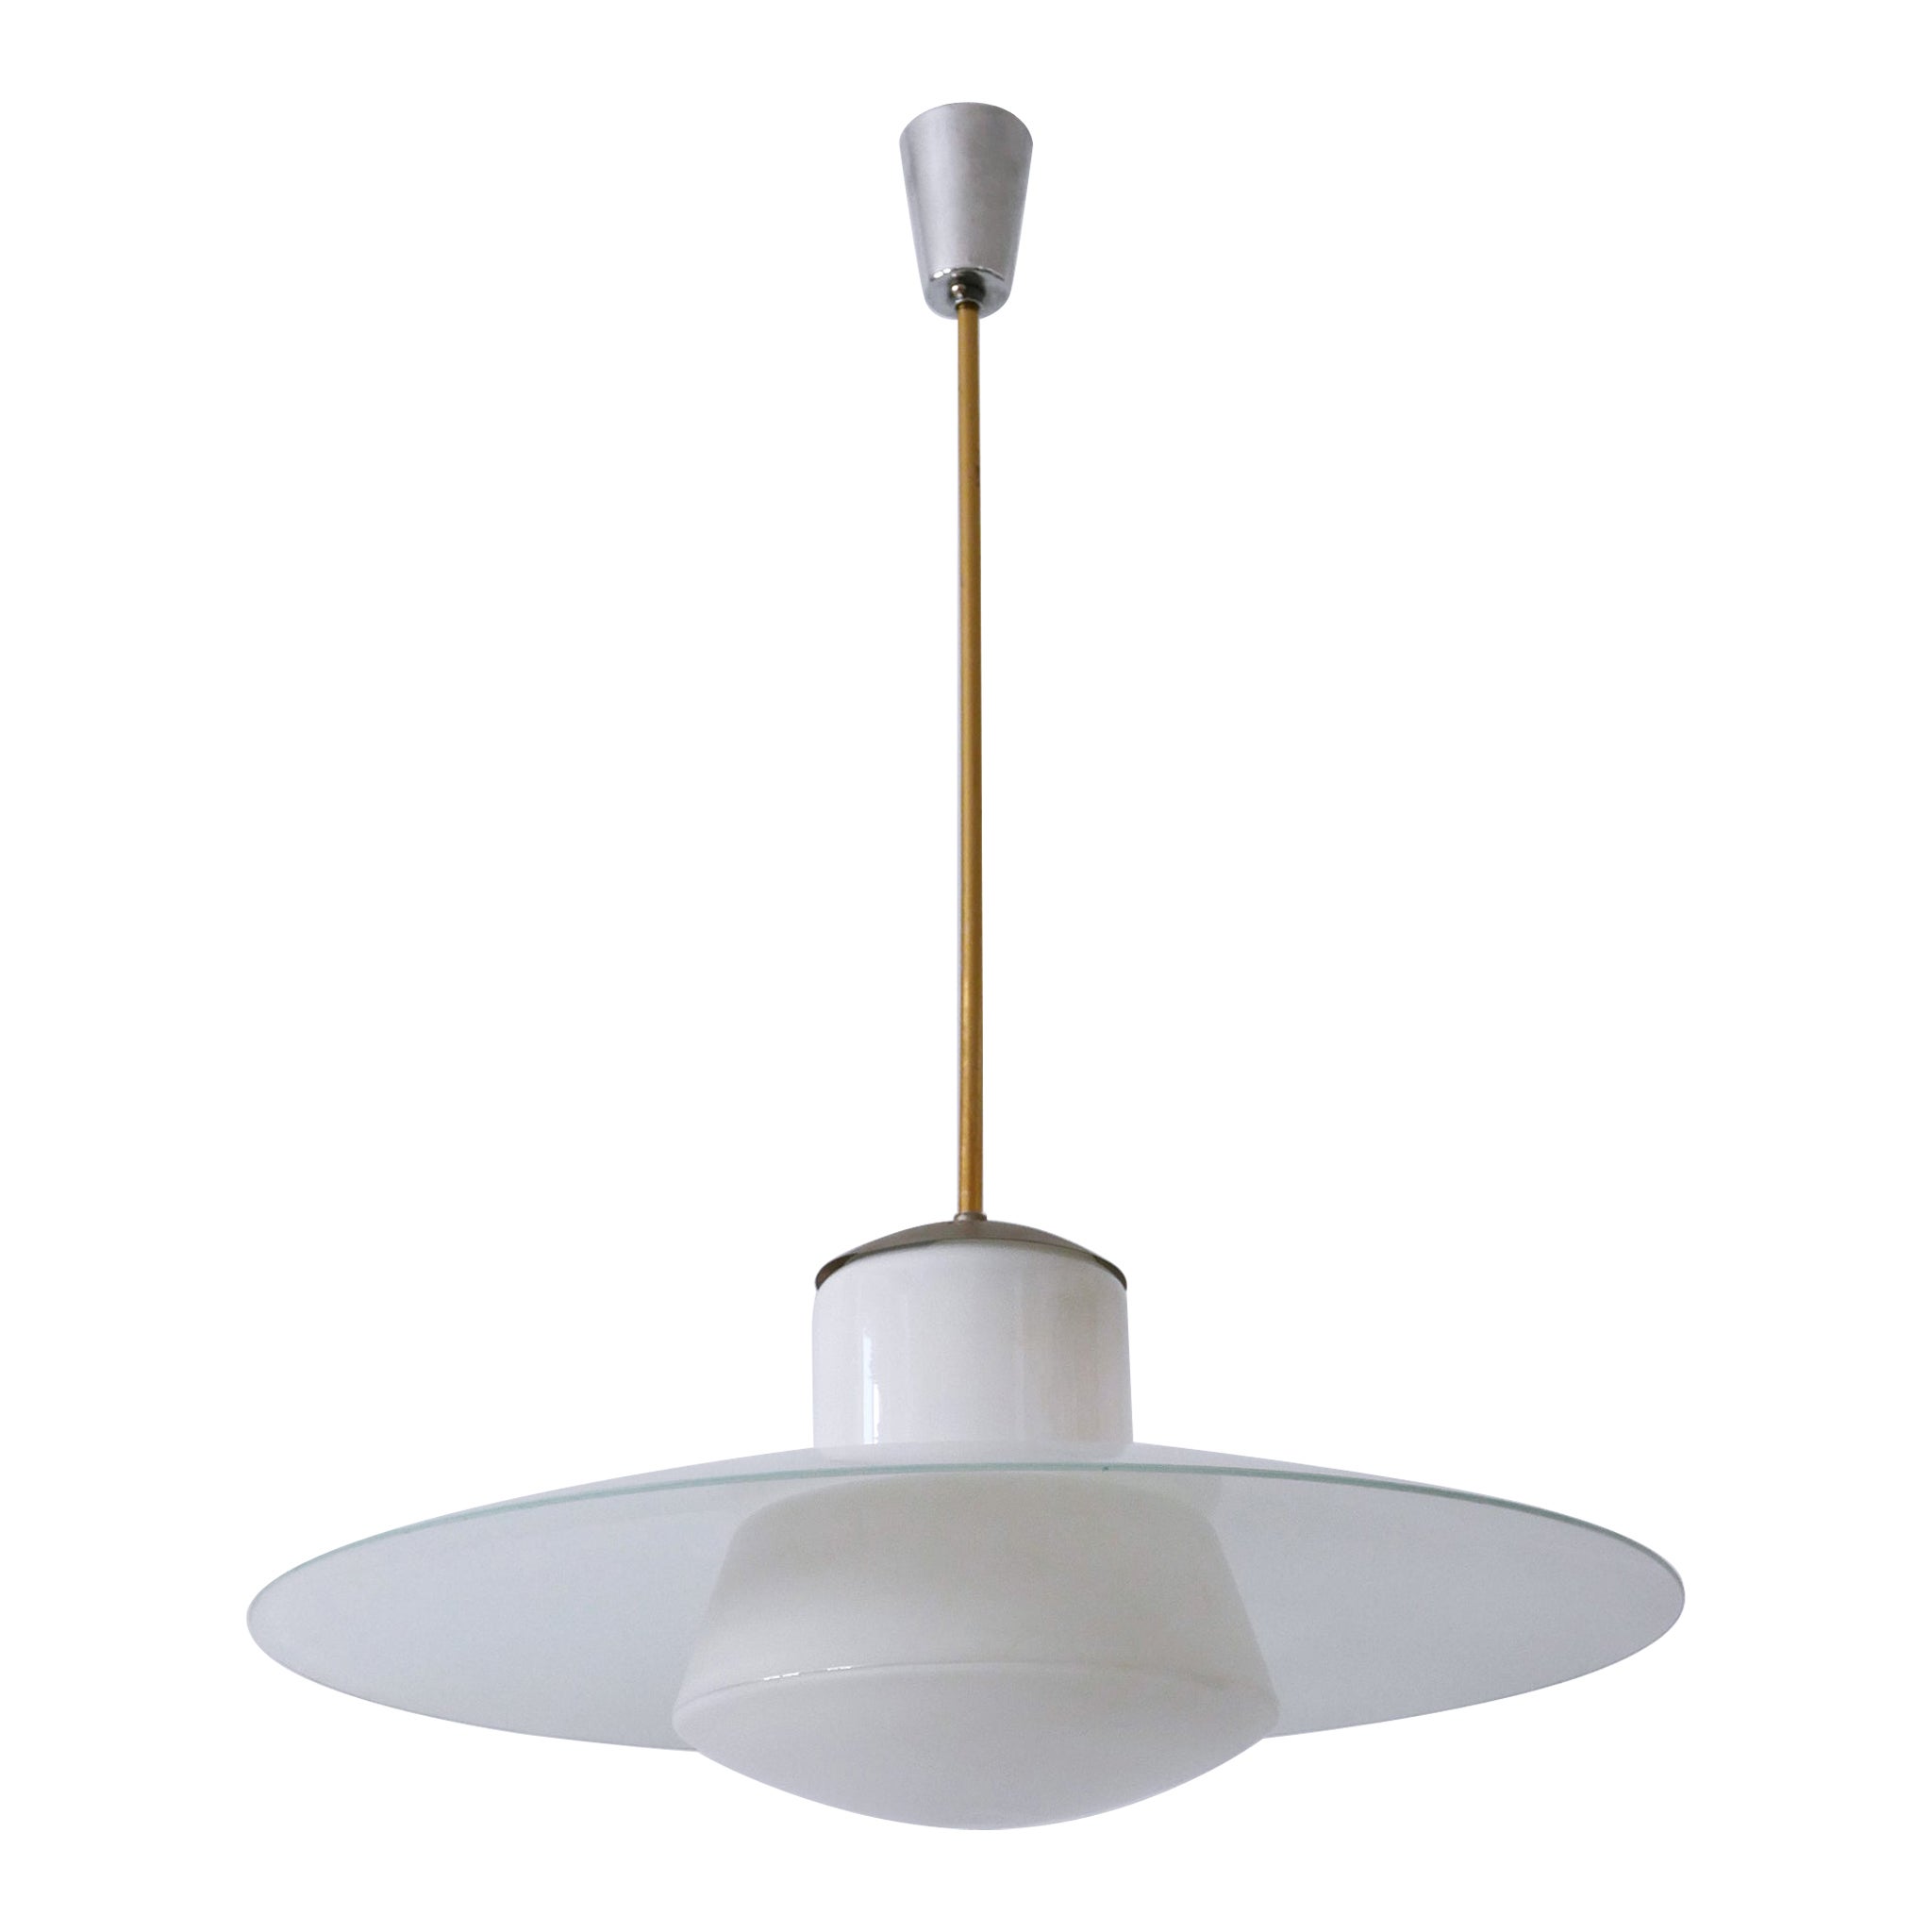 Rare Mid-Century Modern Pendant Lamp by Wolfgang Tümpel for Doria Germany 1950s For Sale